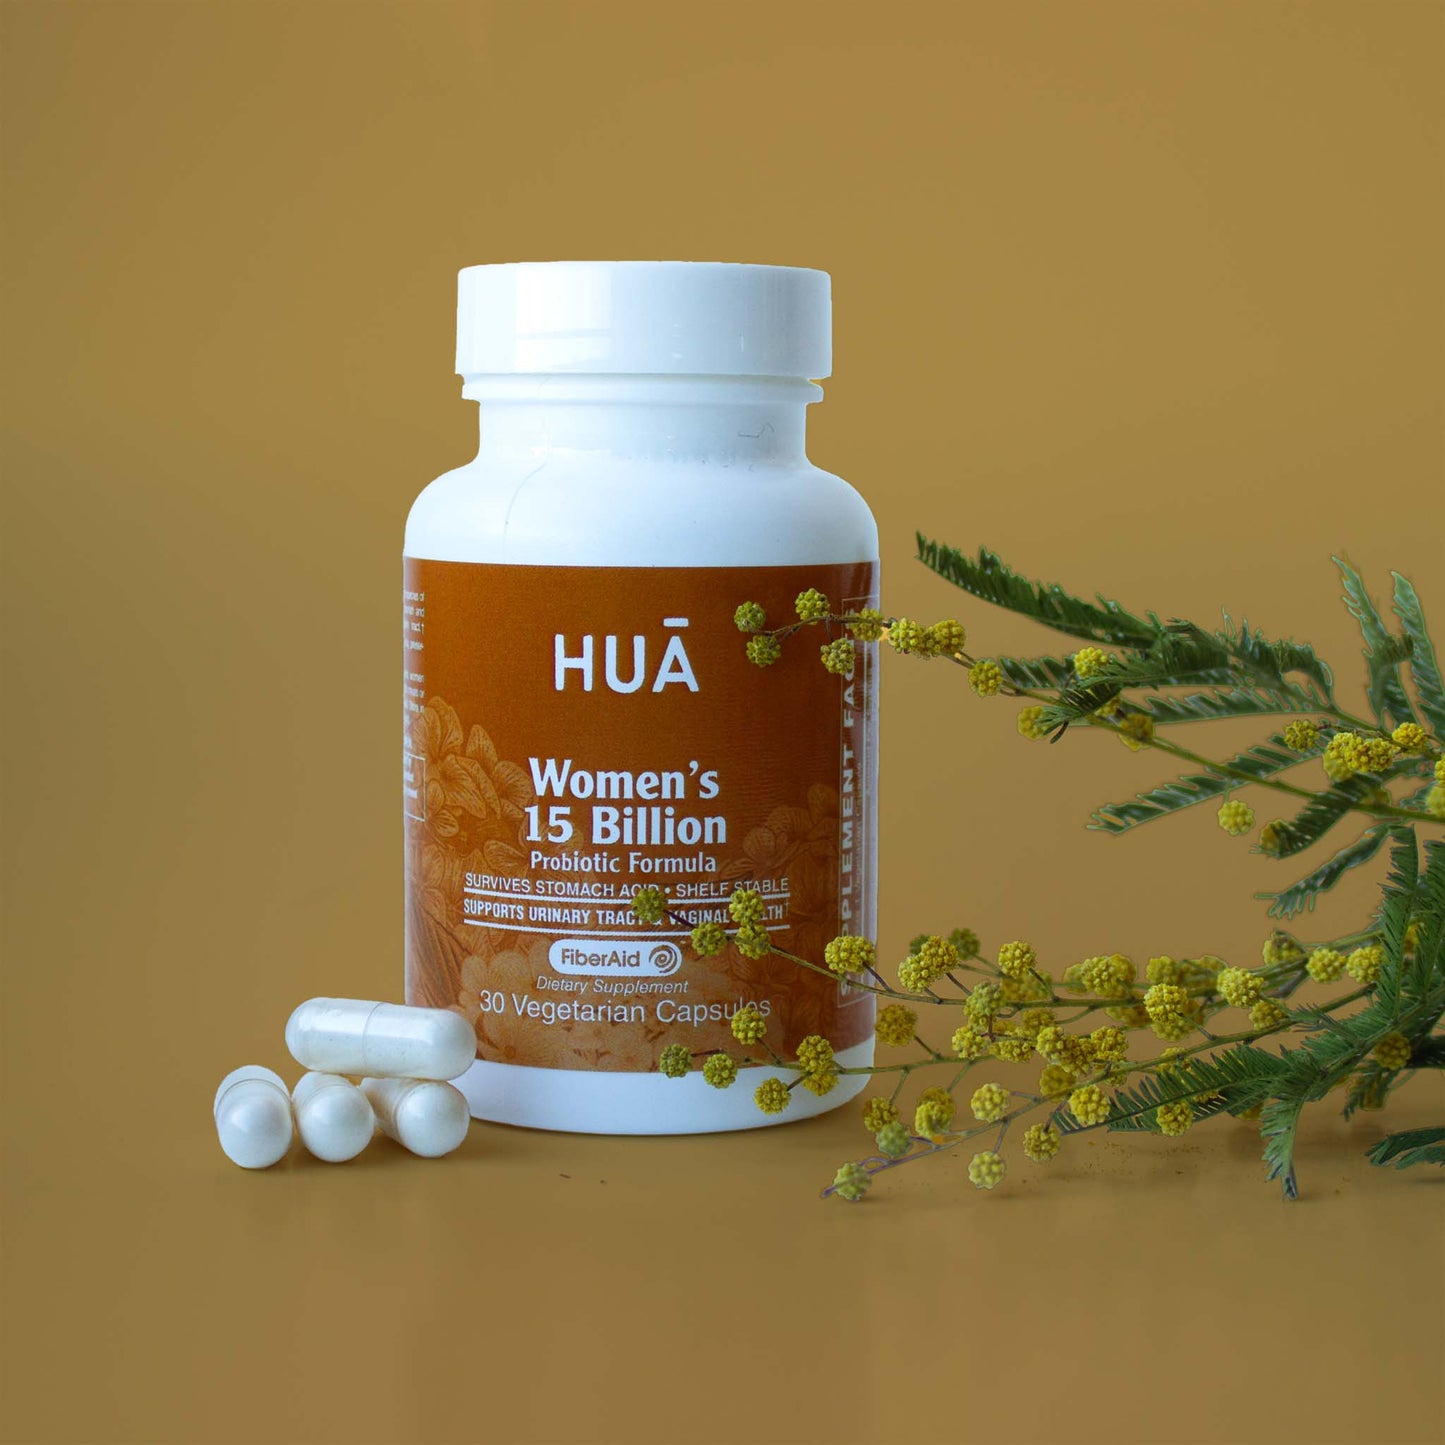 Secondary product image of Women's 15 Billion Probiotic from HUA Wellness with flower props